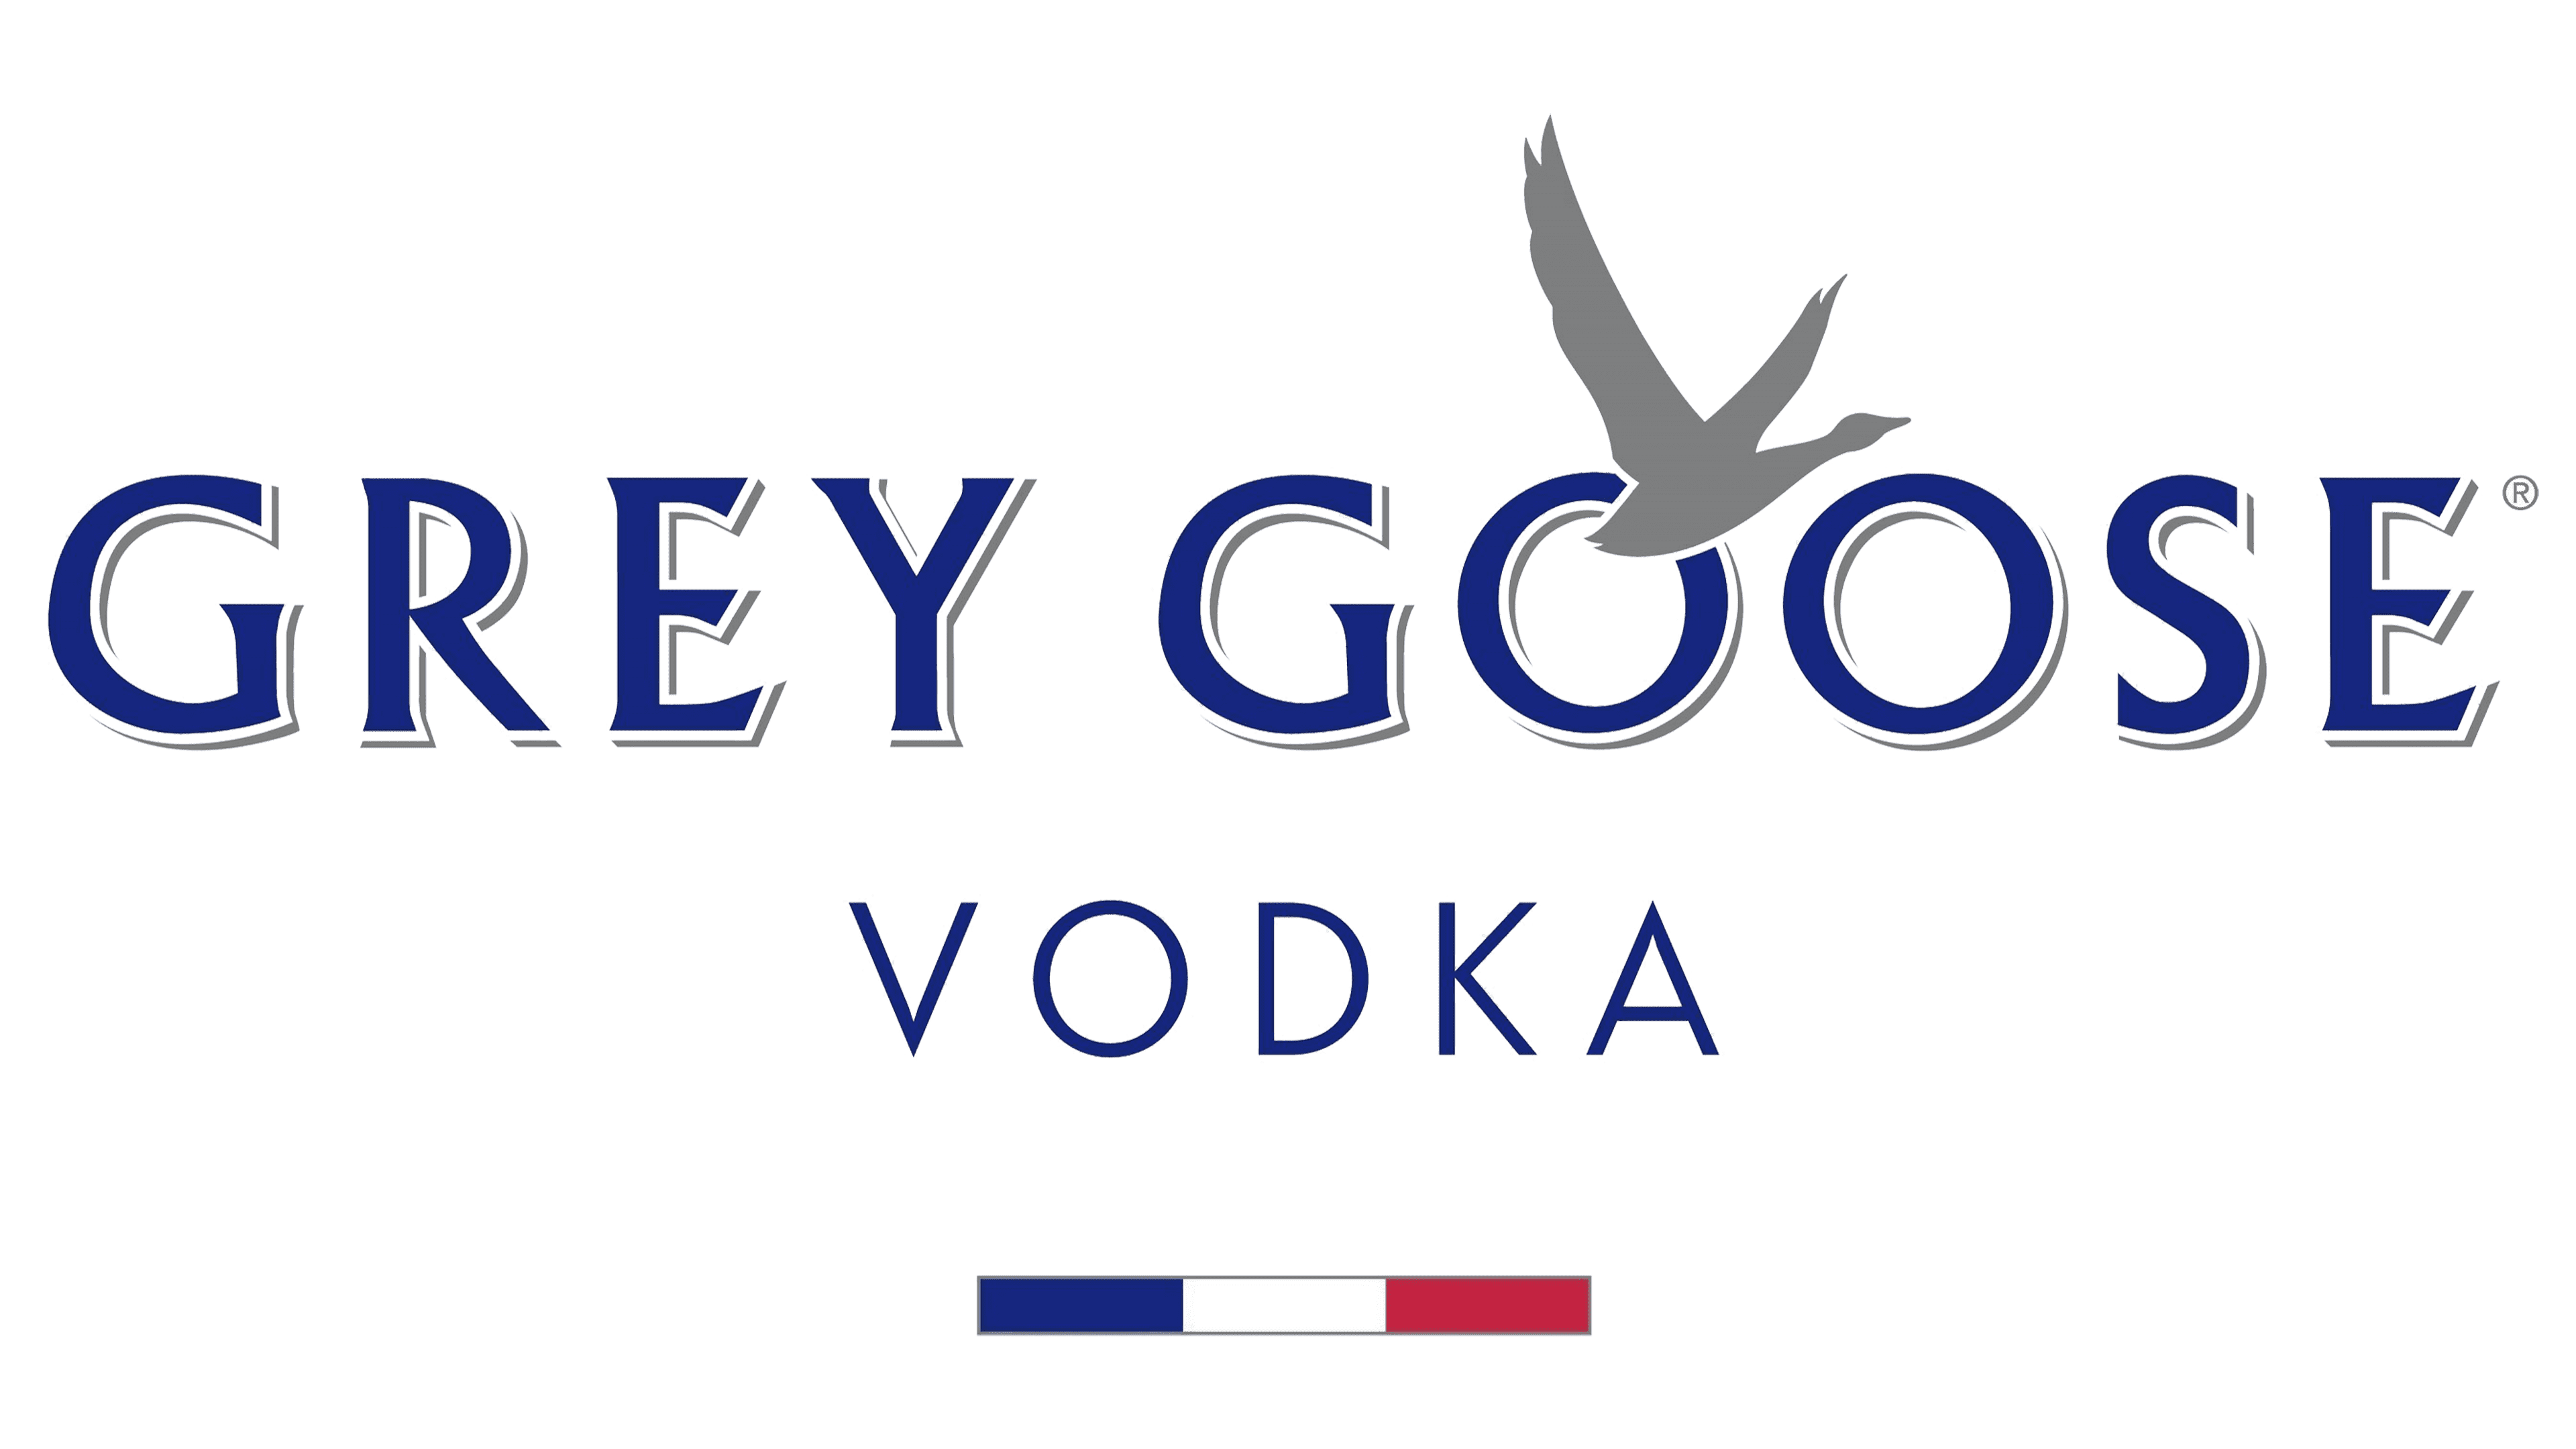 Grey Goose Logo and symbol, meaning, history, PNG, brand